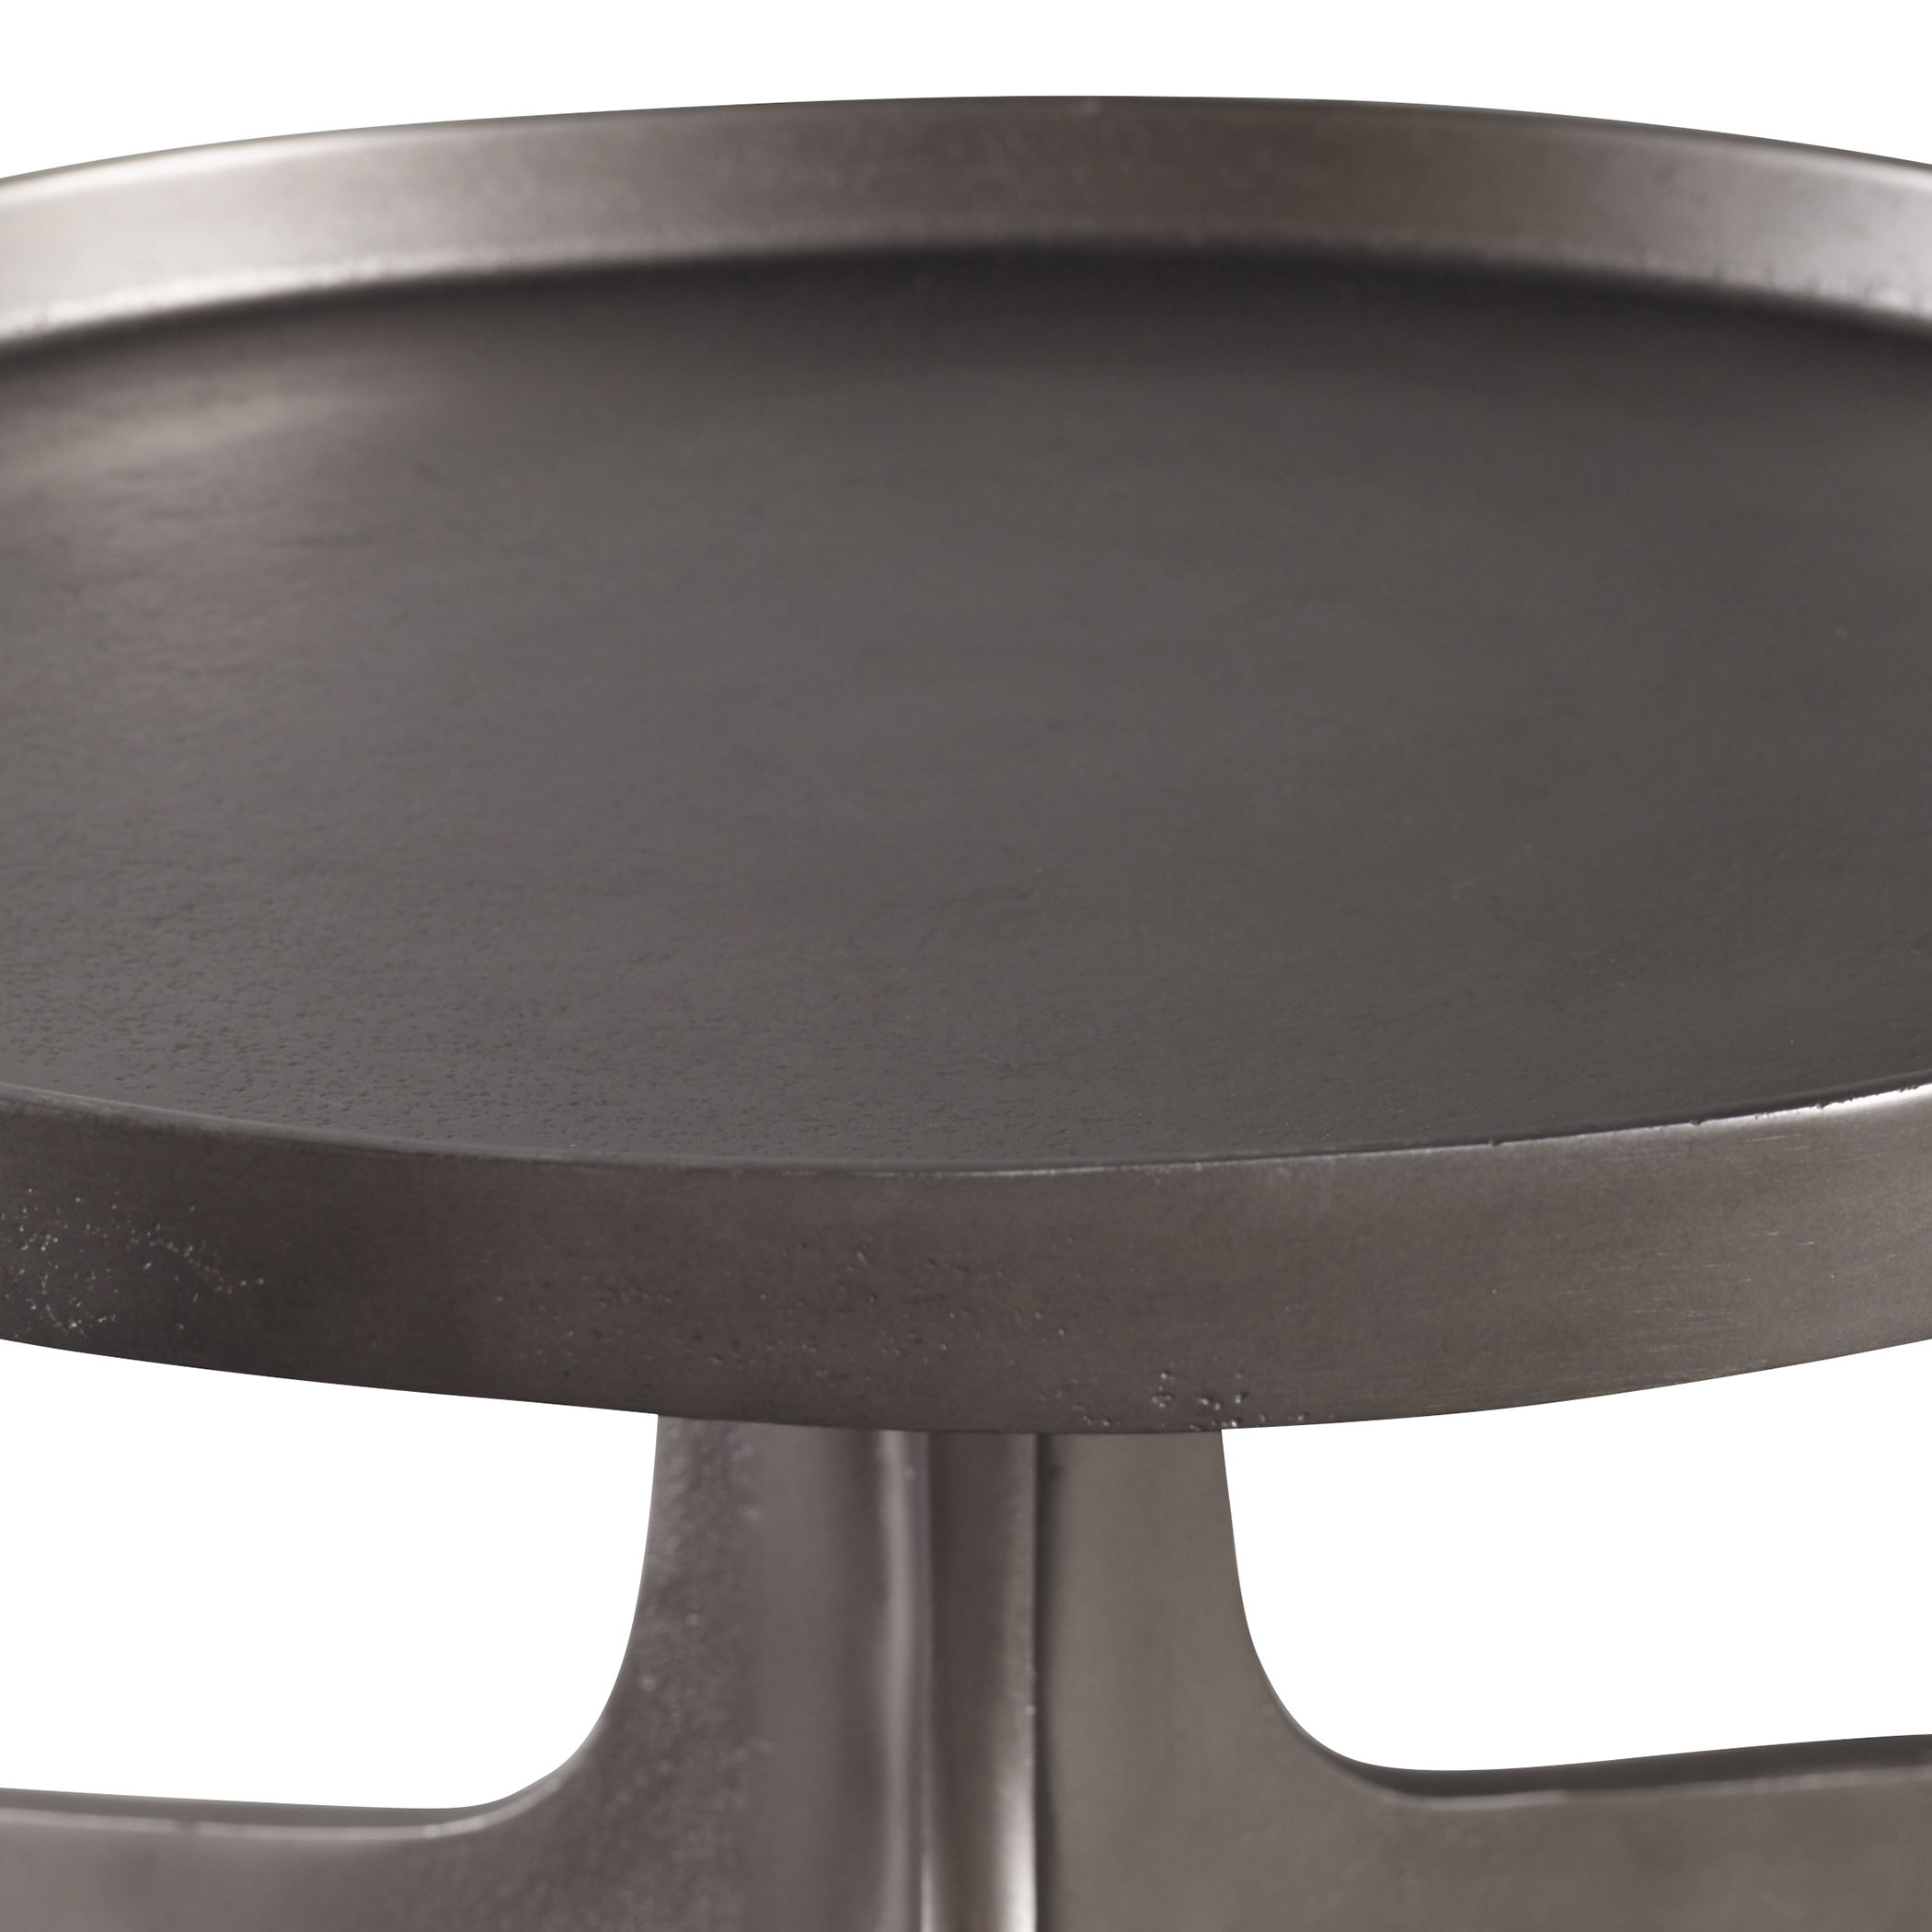 Kenna - Accent Table - Nickel